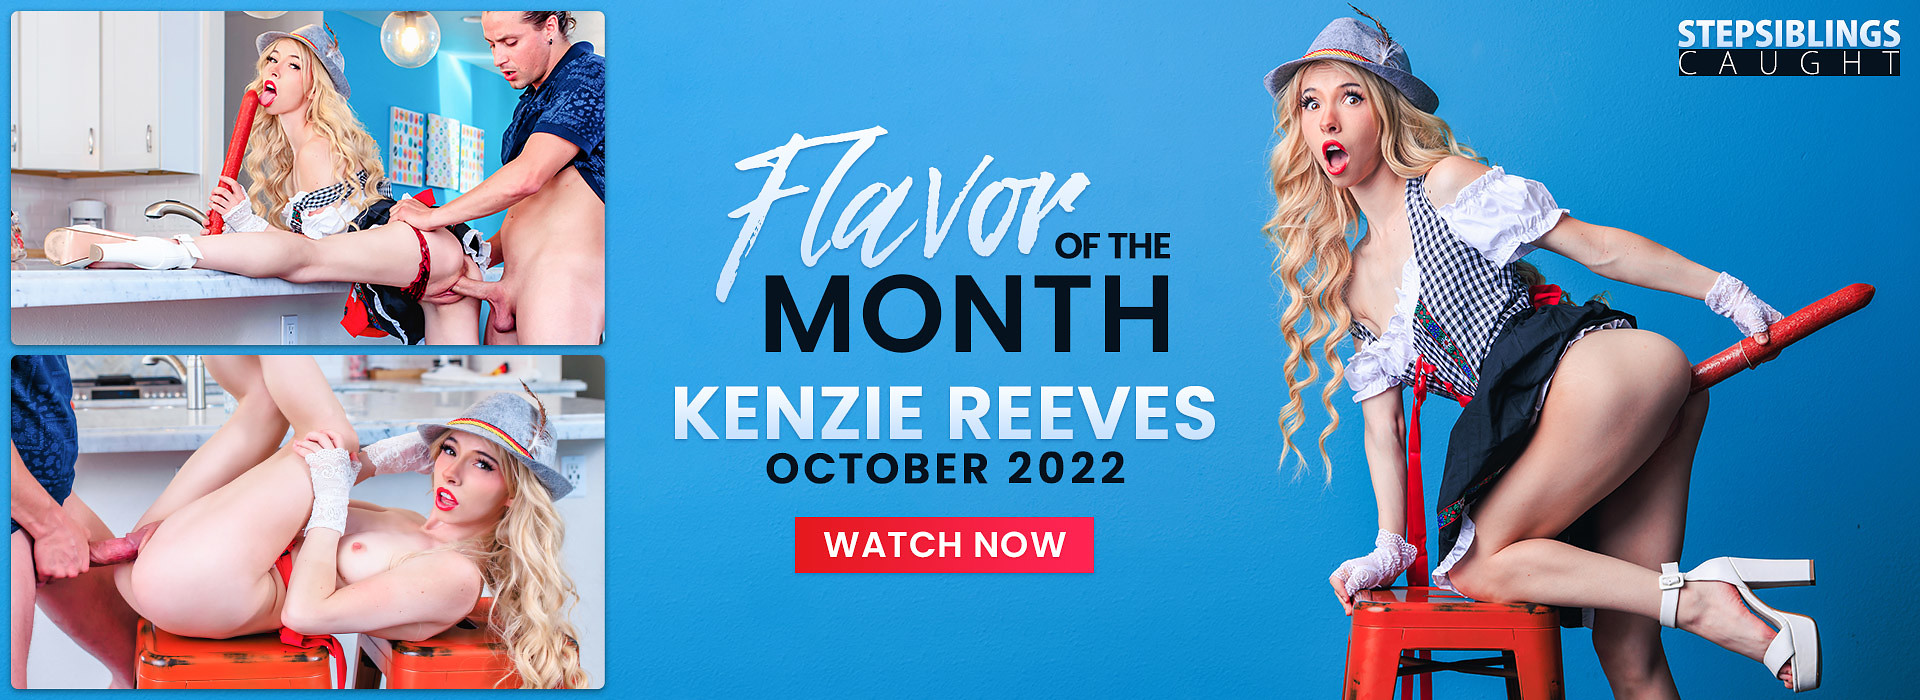 October 2022 Flavor Of The Month Kenzie Reeves